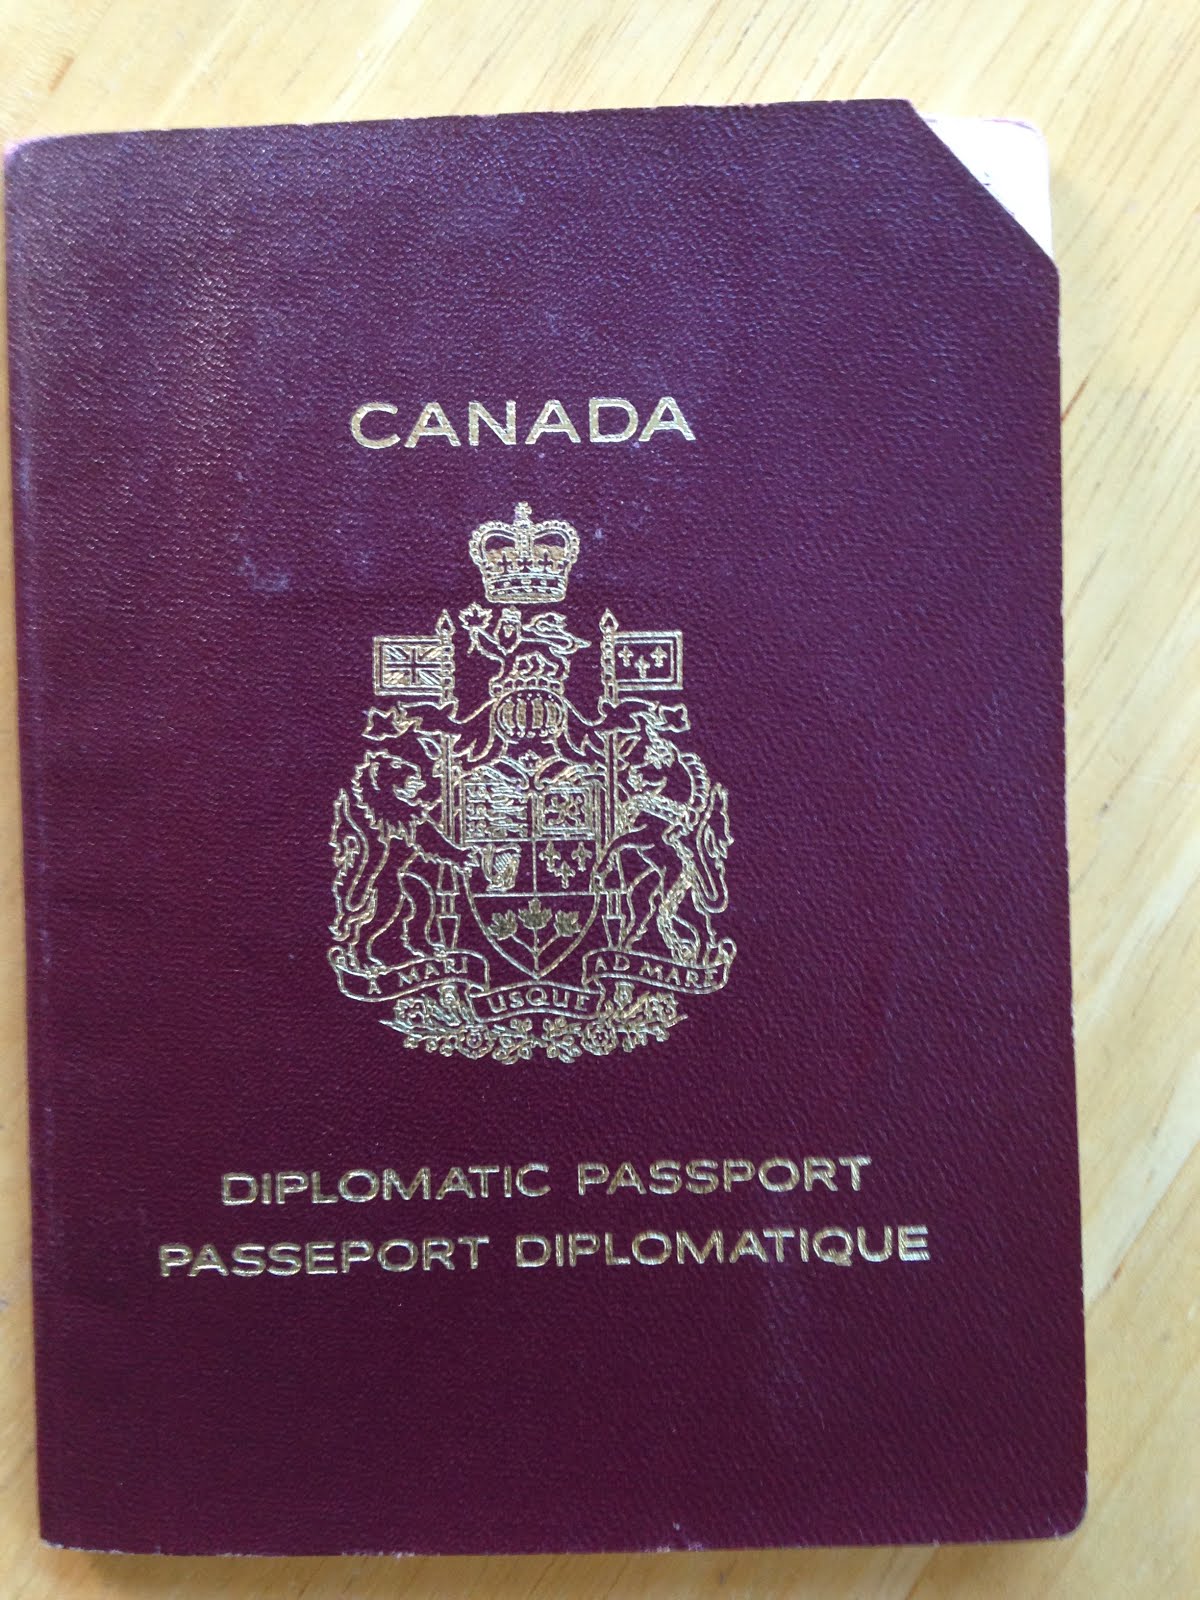 One of my old dip passports